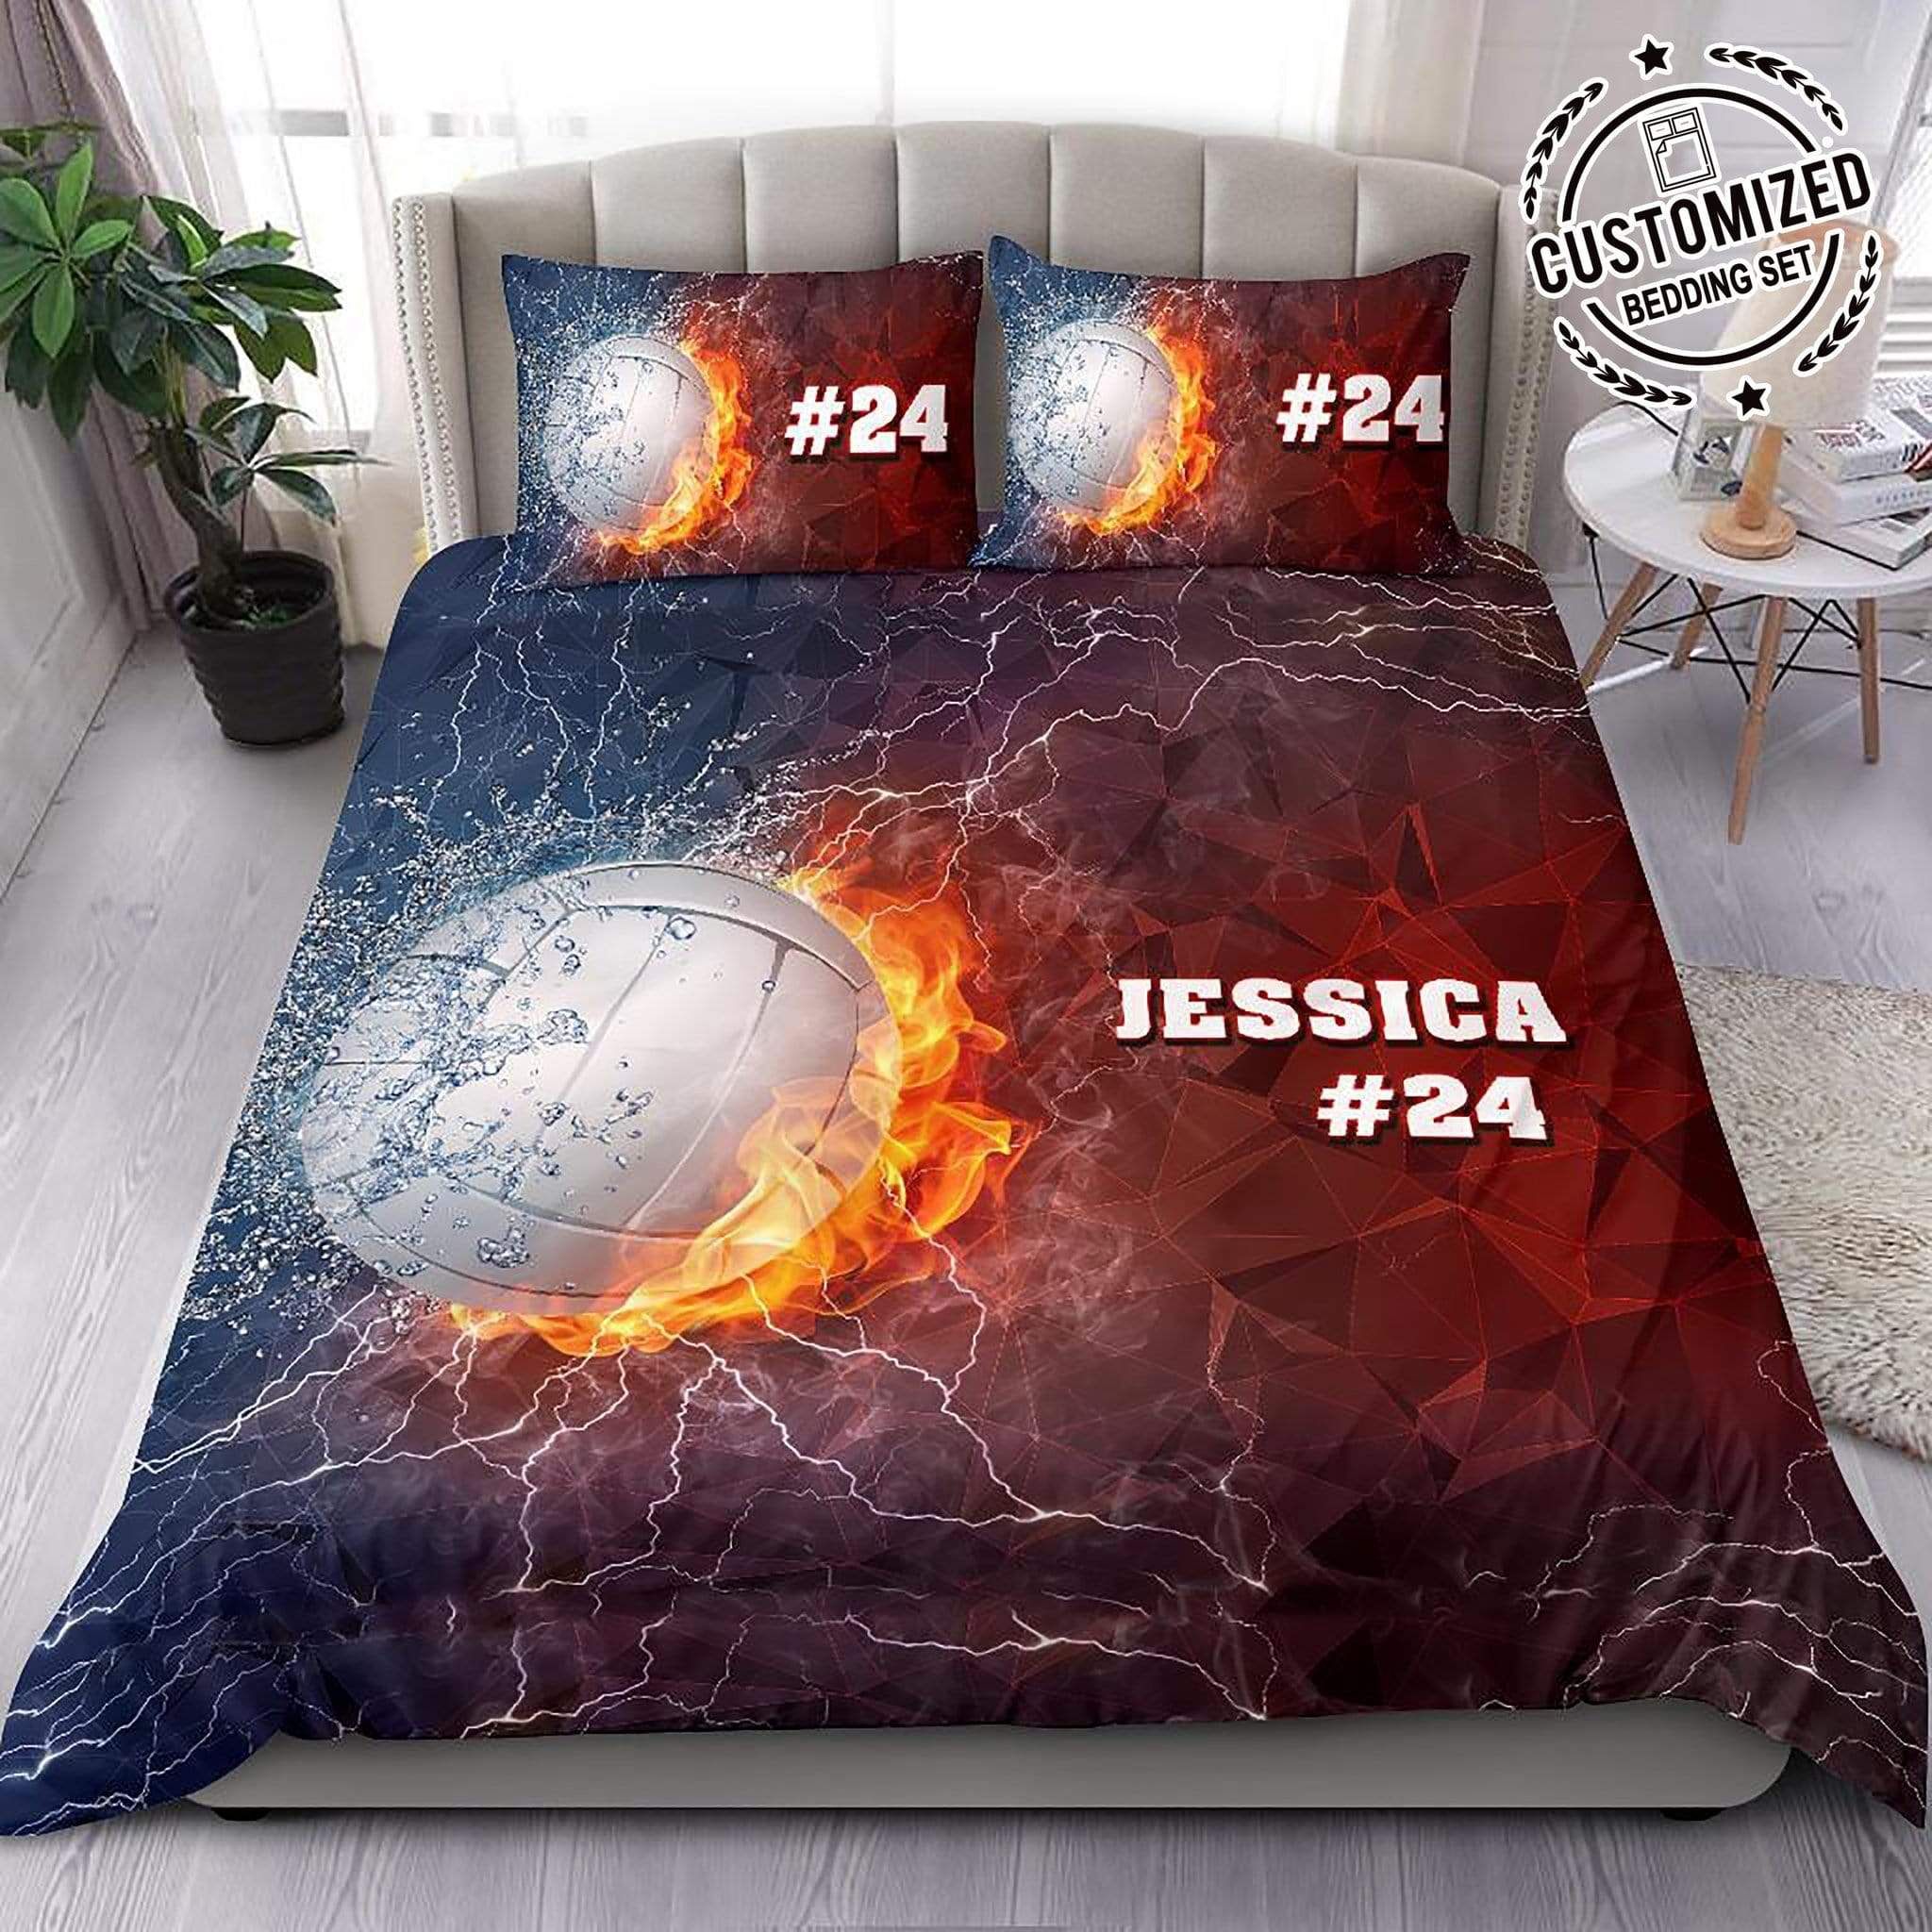 Personalized Customized Duvet Cover Volleyball Water And Fire Bedding Set With Your Name